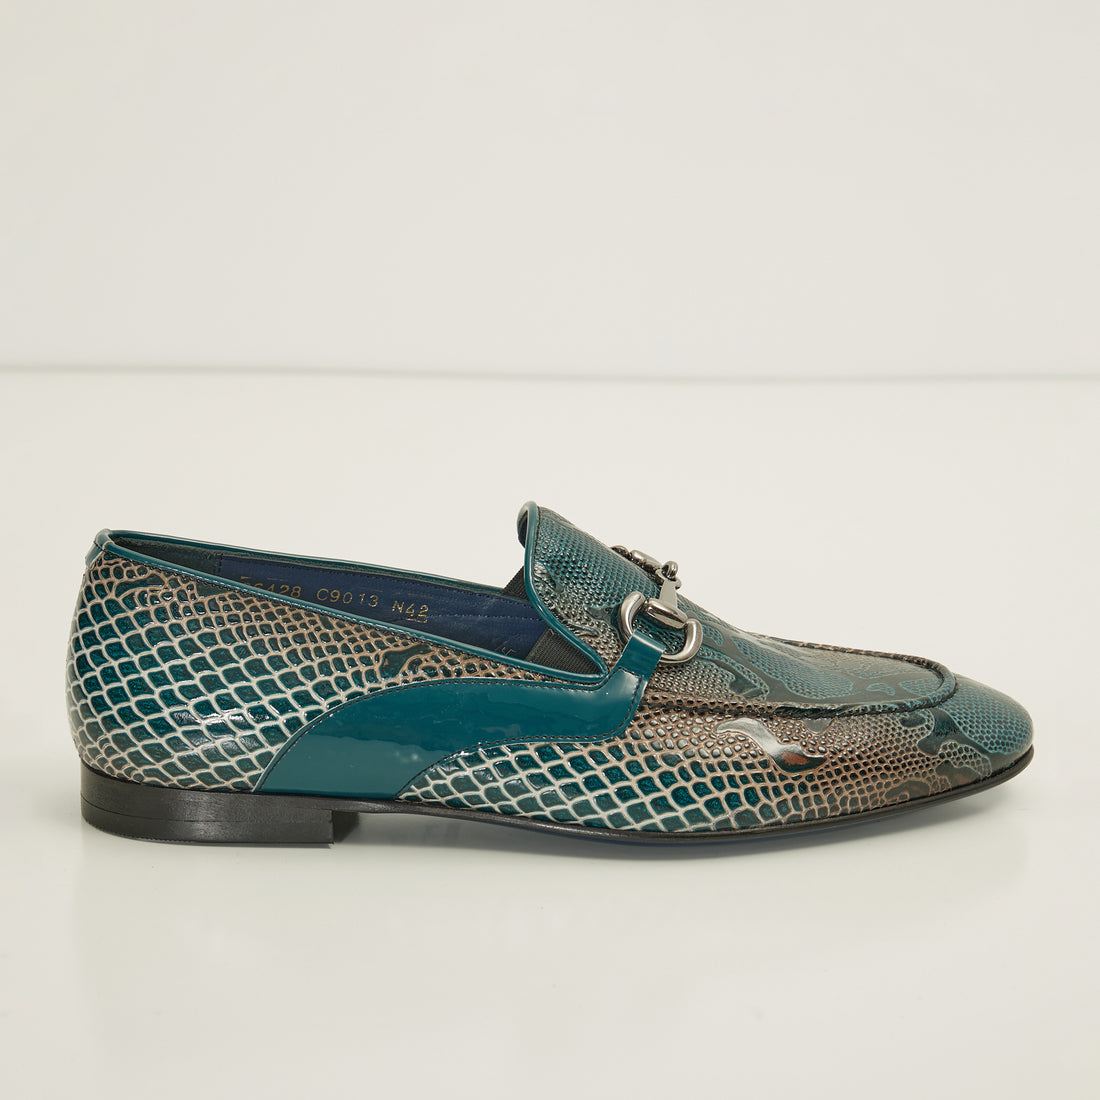 N° C9013X SNAKE EMBOSSED LEATHER AND SILVER METAL BIT LOAFER  - GREEN BEIGE